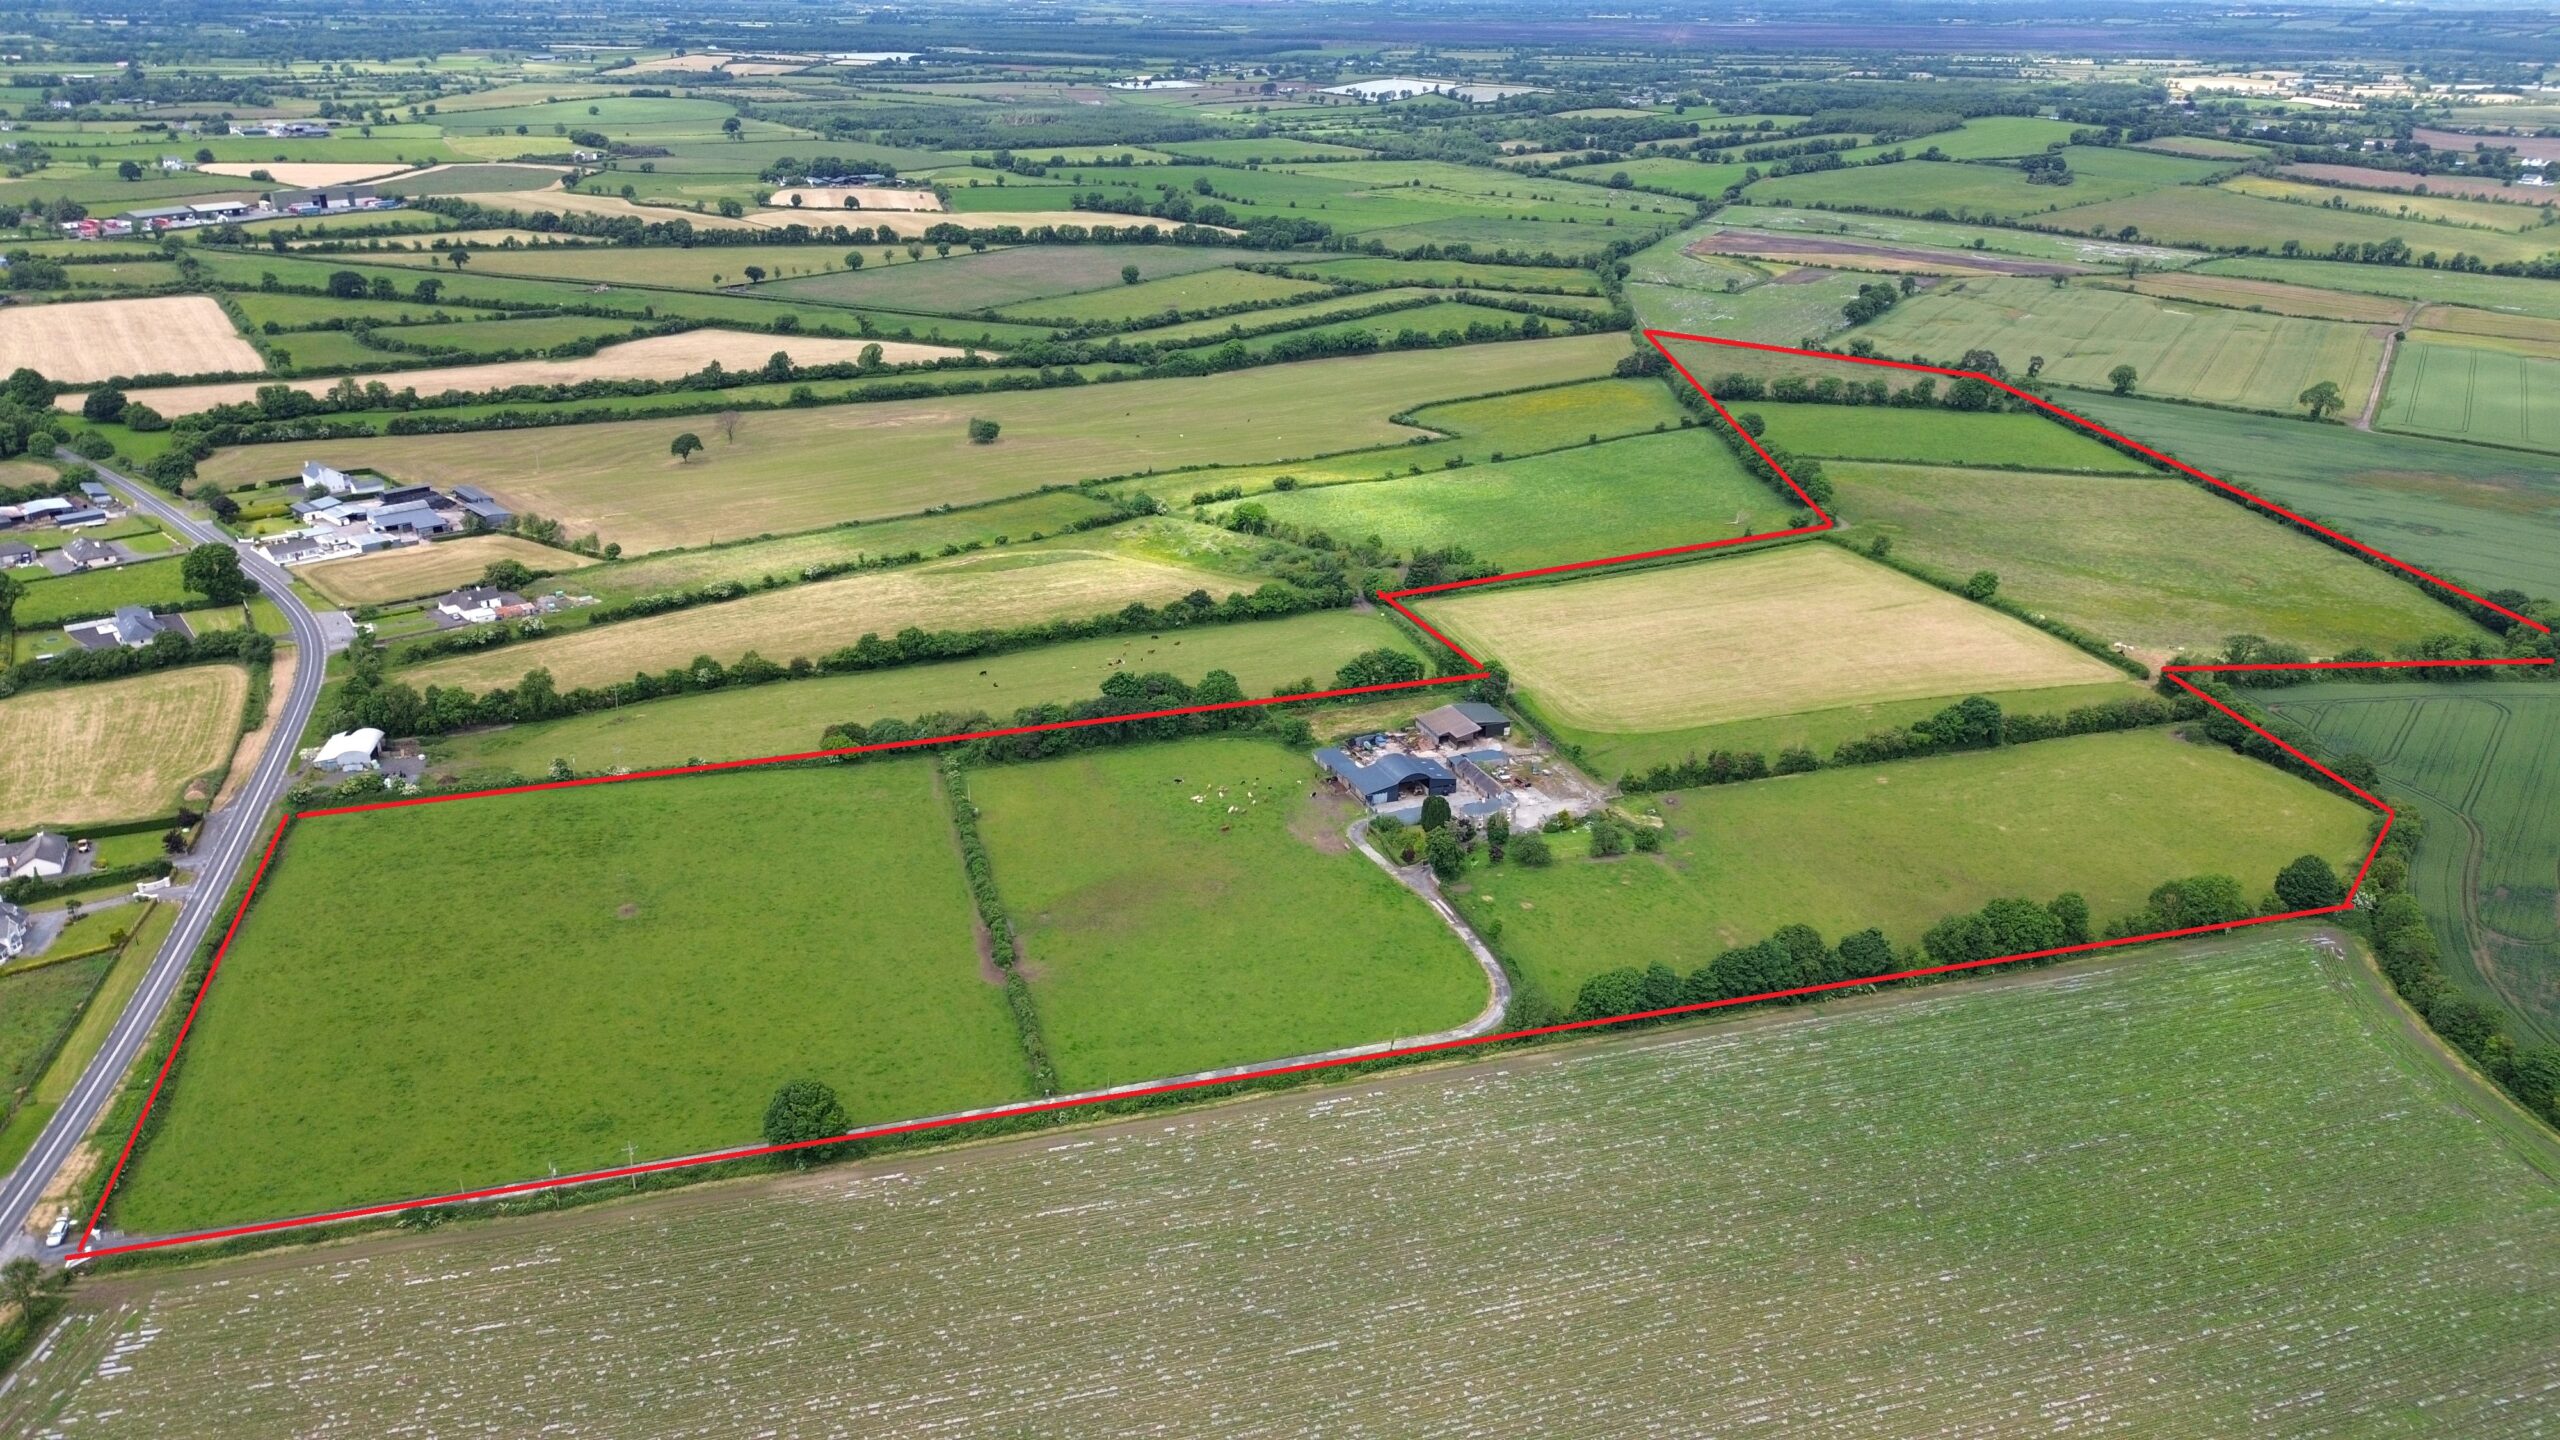 50 acre residential farm for sale in rosenallis Co laois with Hennessy auctioneers as advertised on LaoisToday